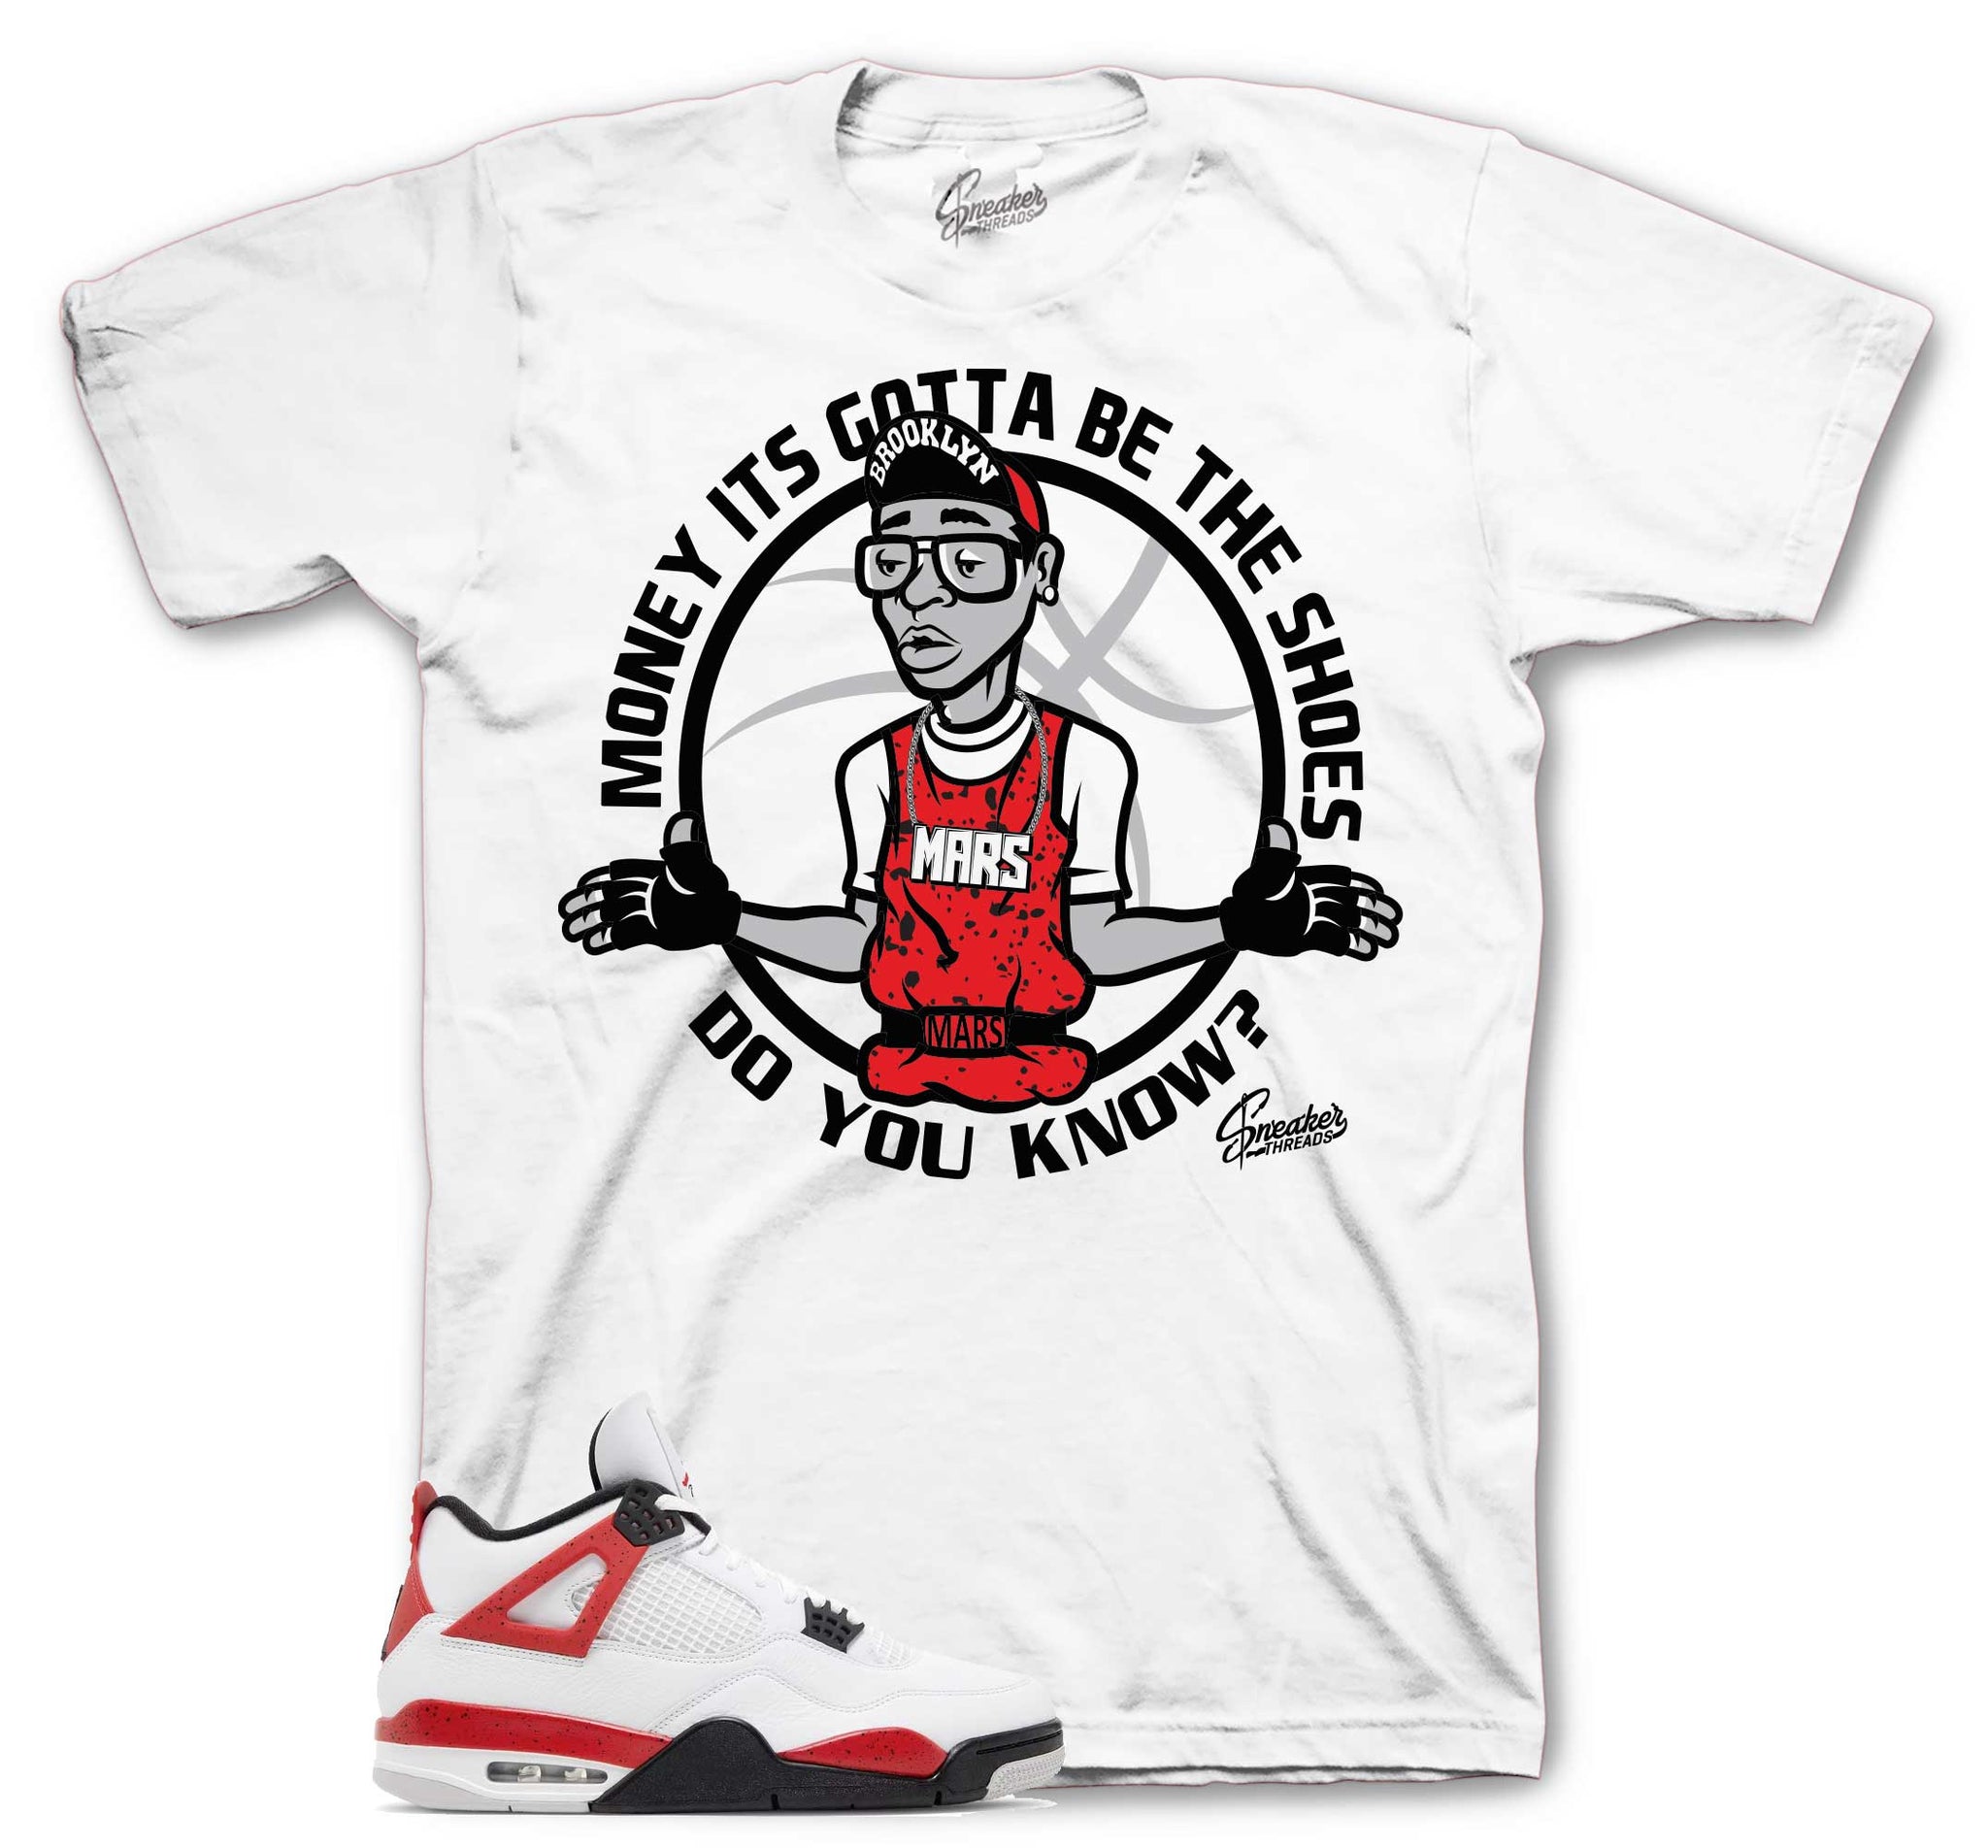 Retro 4 Red Cement Shirt - Gotta Be The Shoes - White